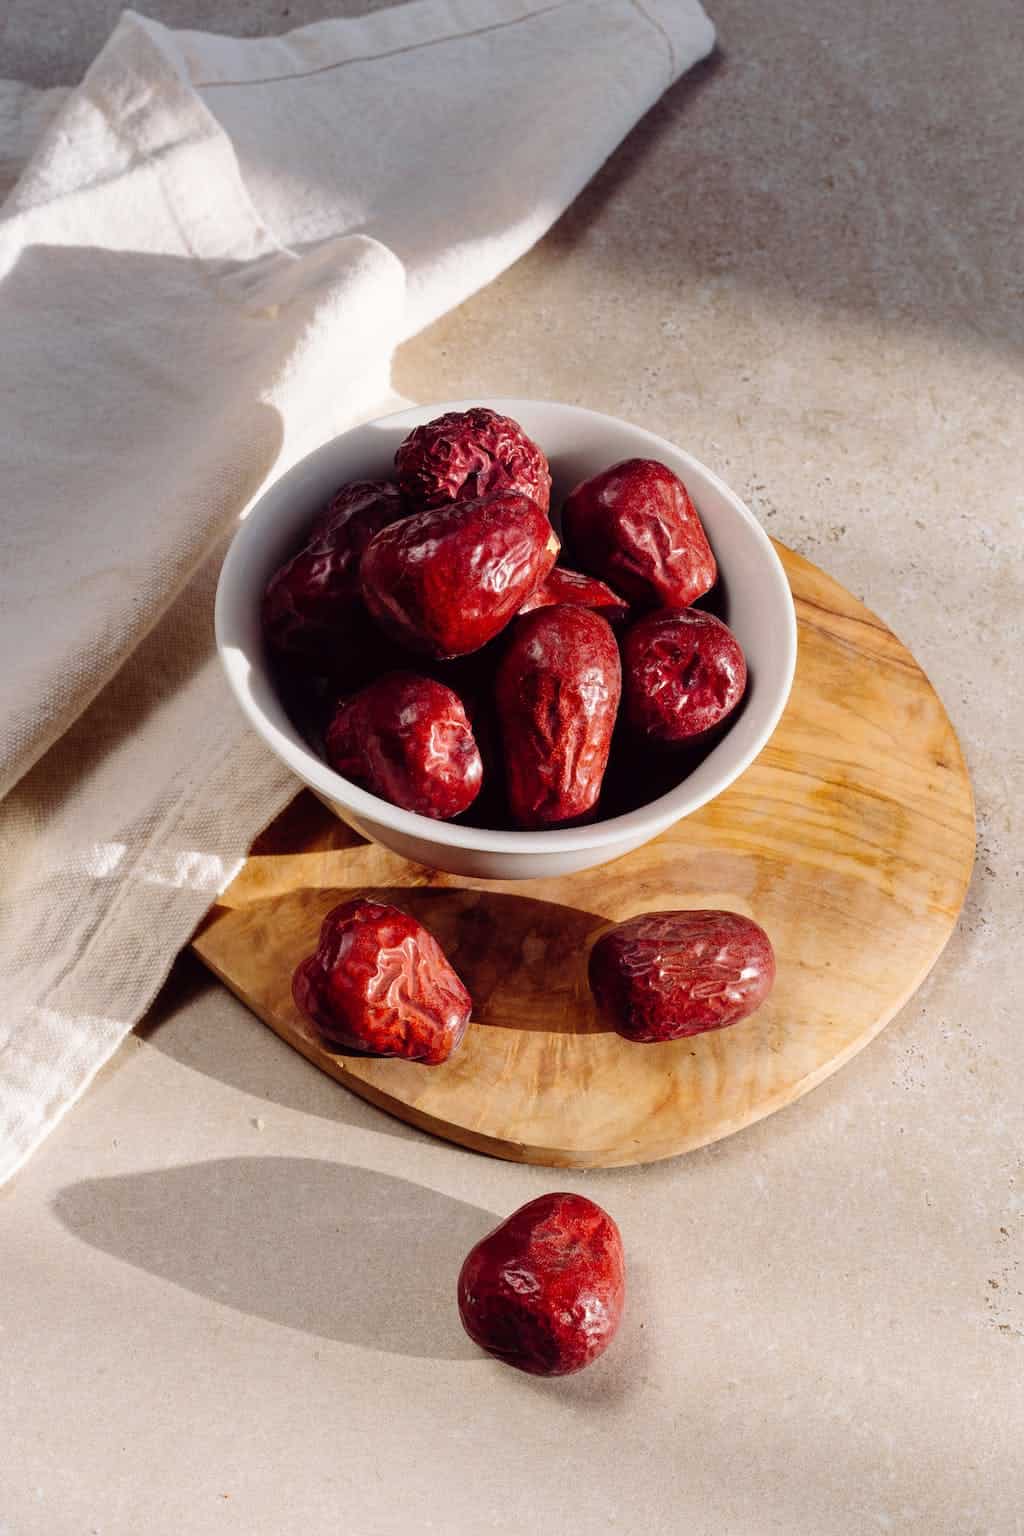 Can Dogs Eat Jujube?